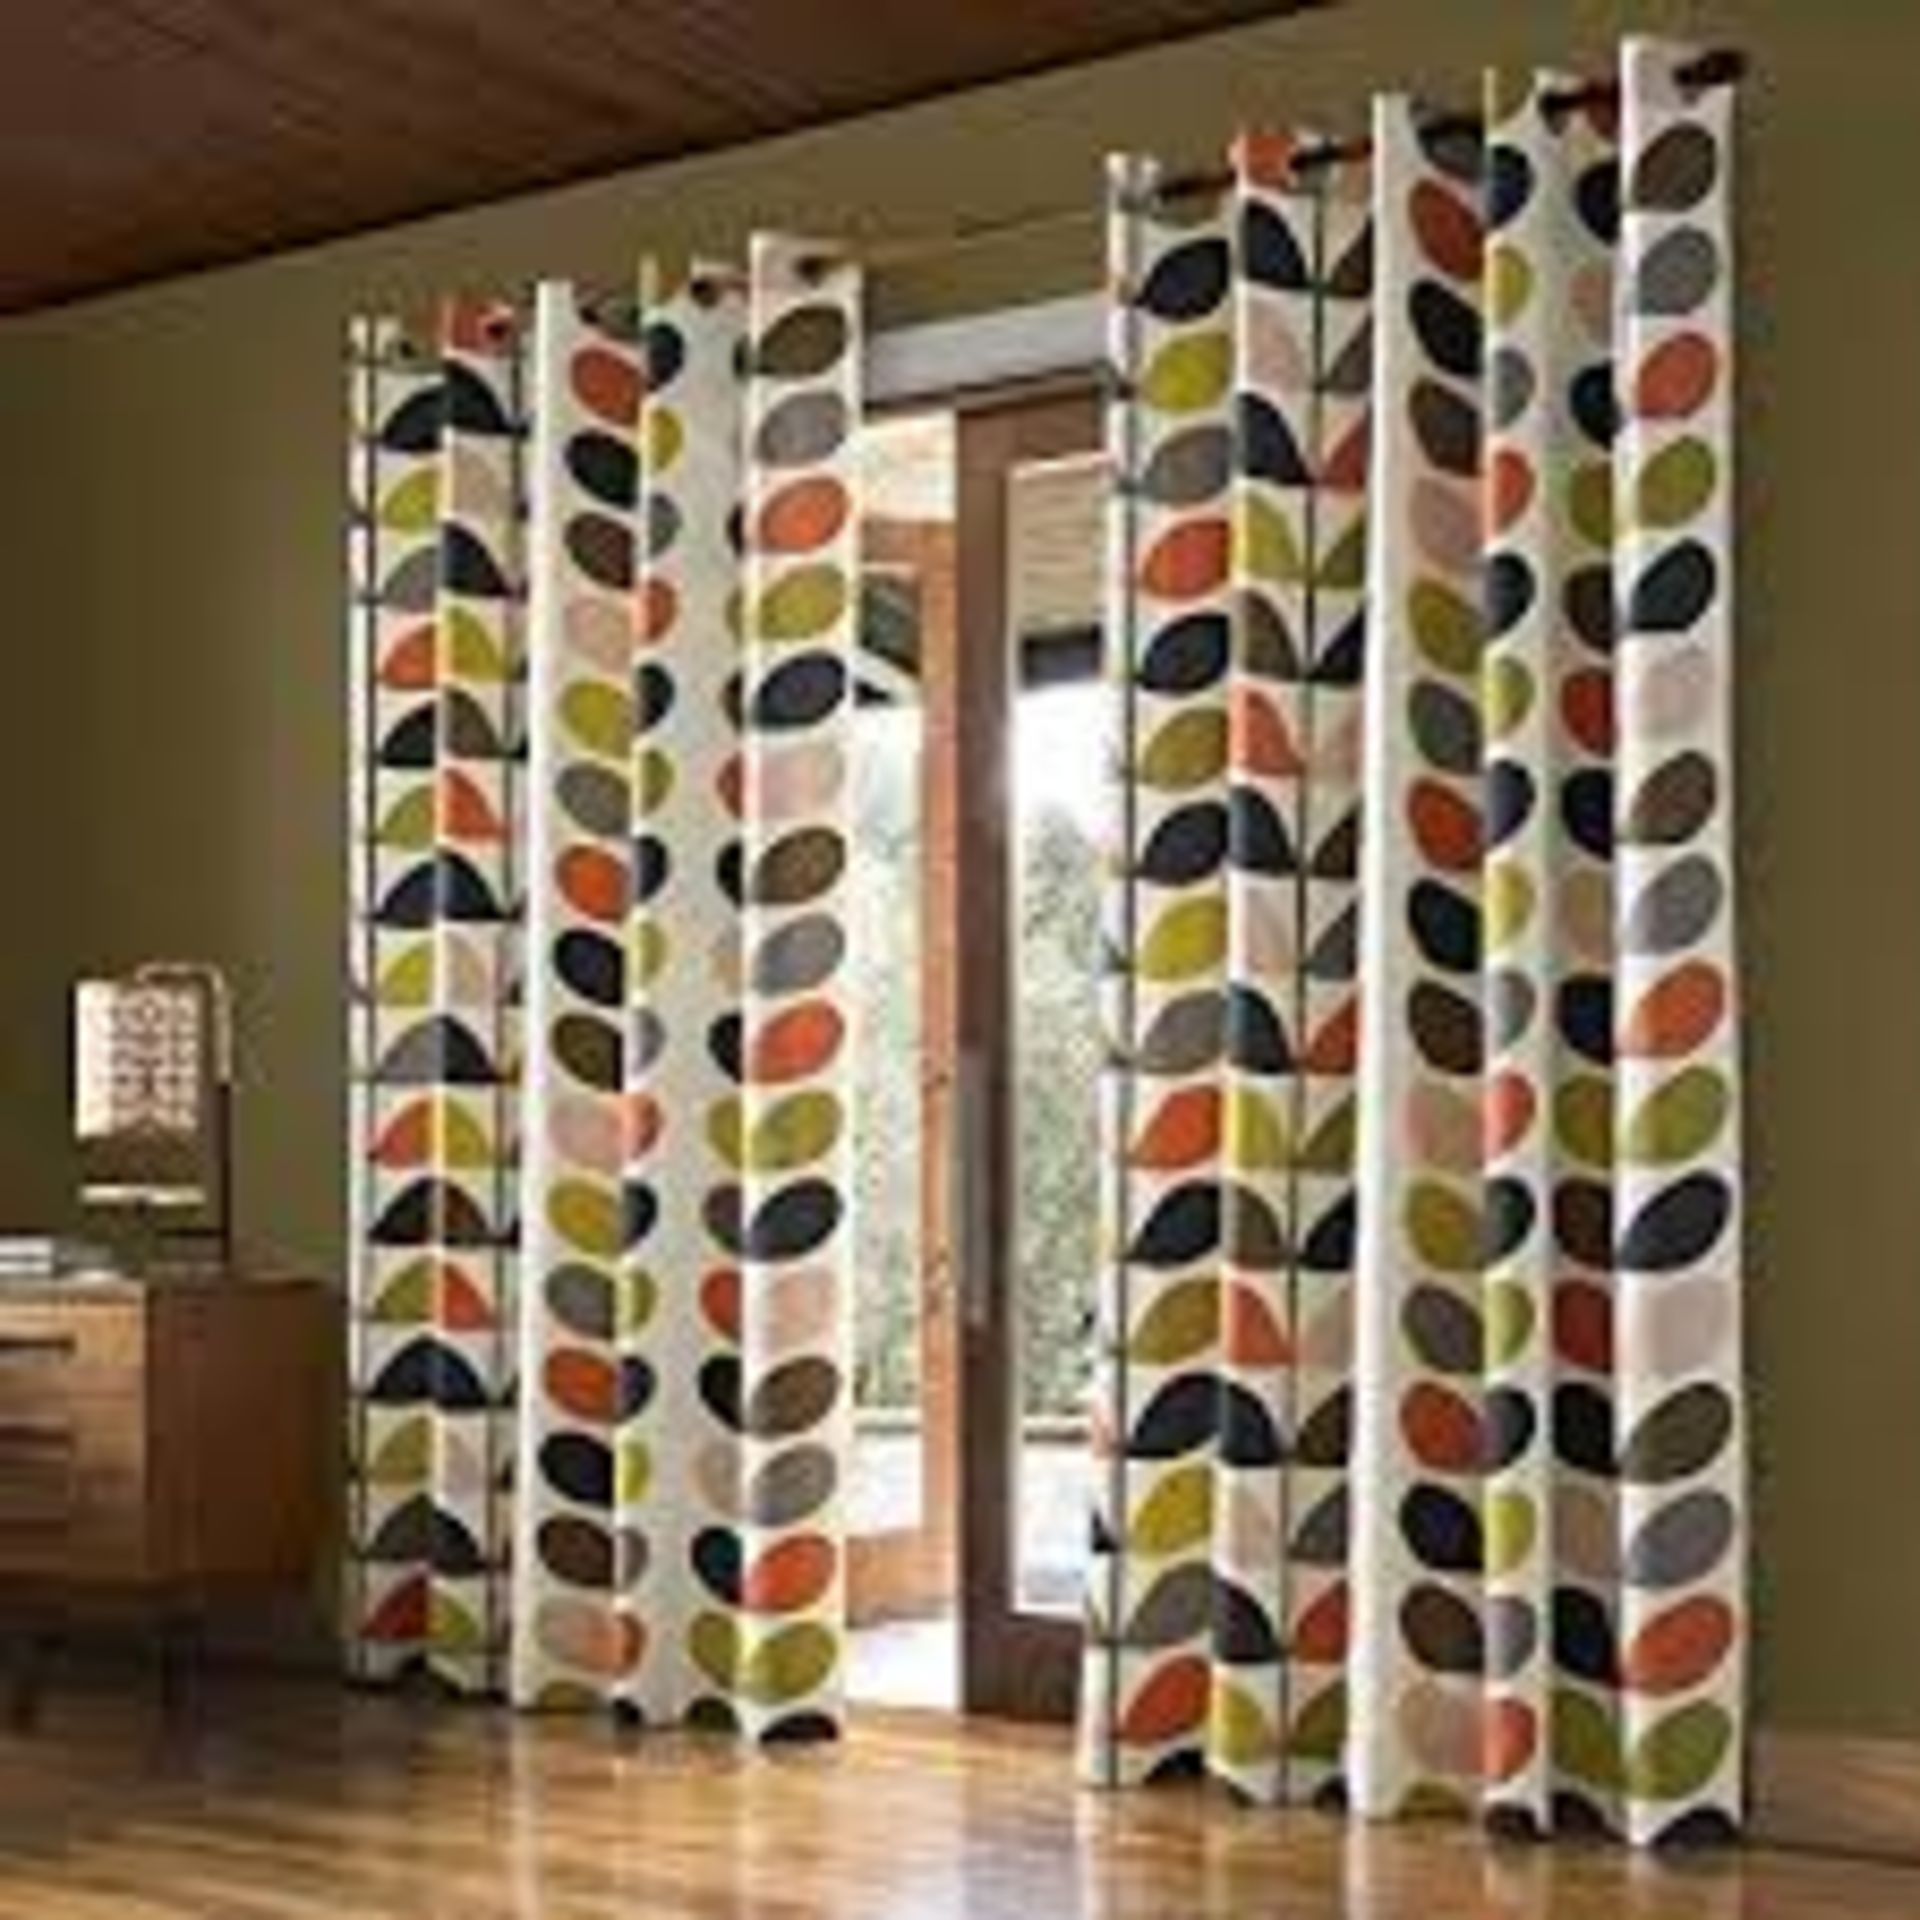 Pair of 66 x 72Inch Orla Kiely Stem Curtains RRP £100 (4401112) (Public Viewing and Appraisals